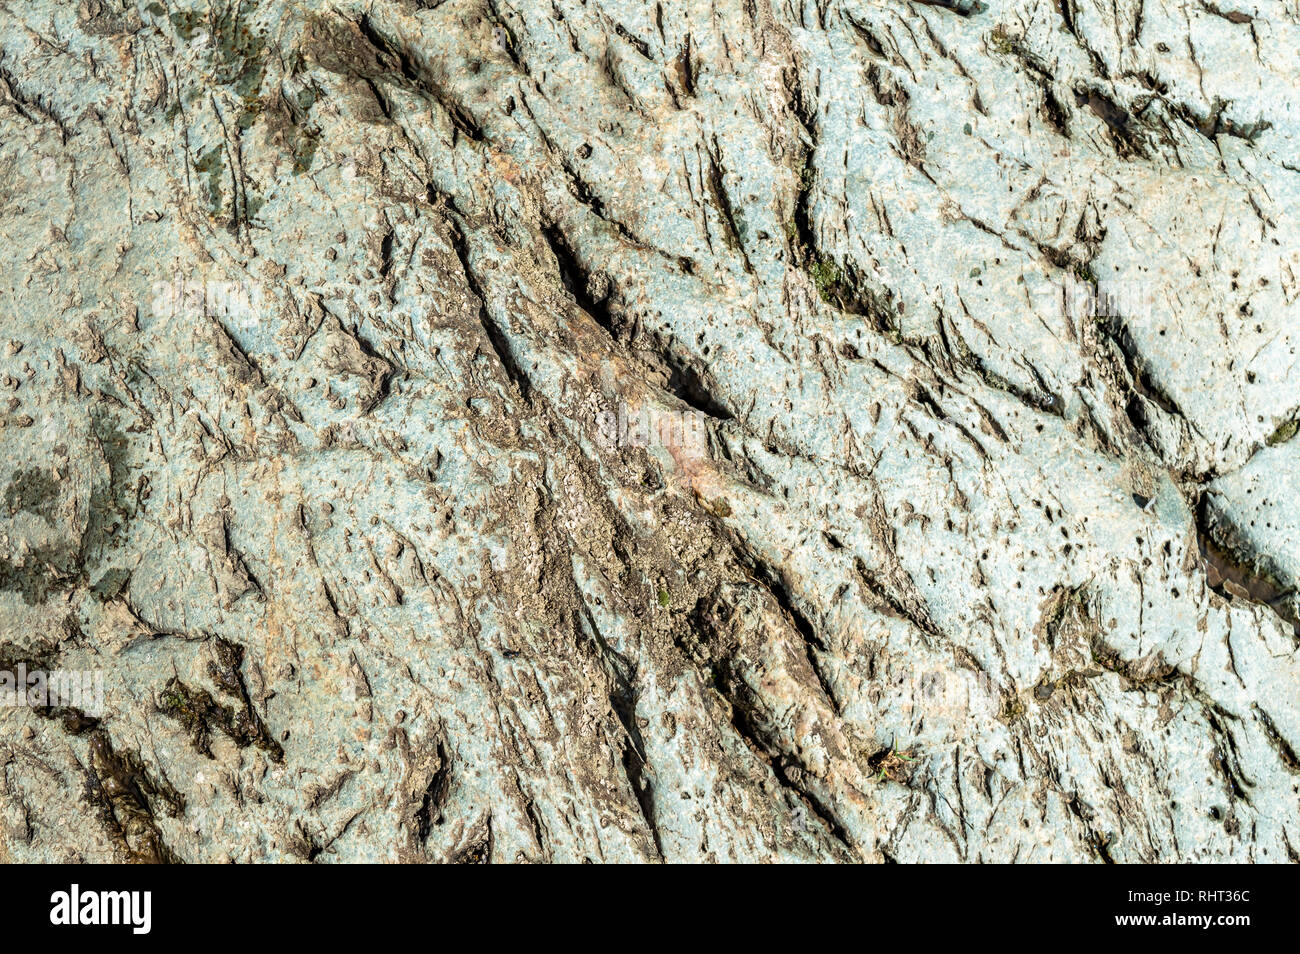 Texture and details on rock wall mountain face Stock Photo